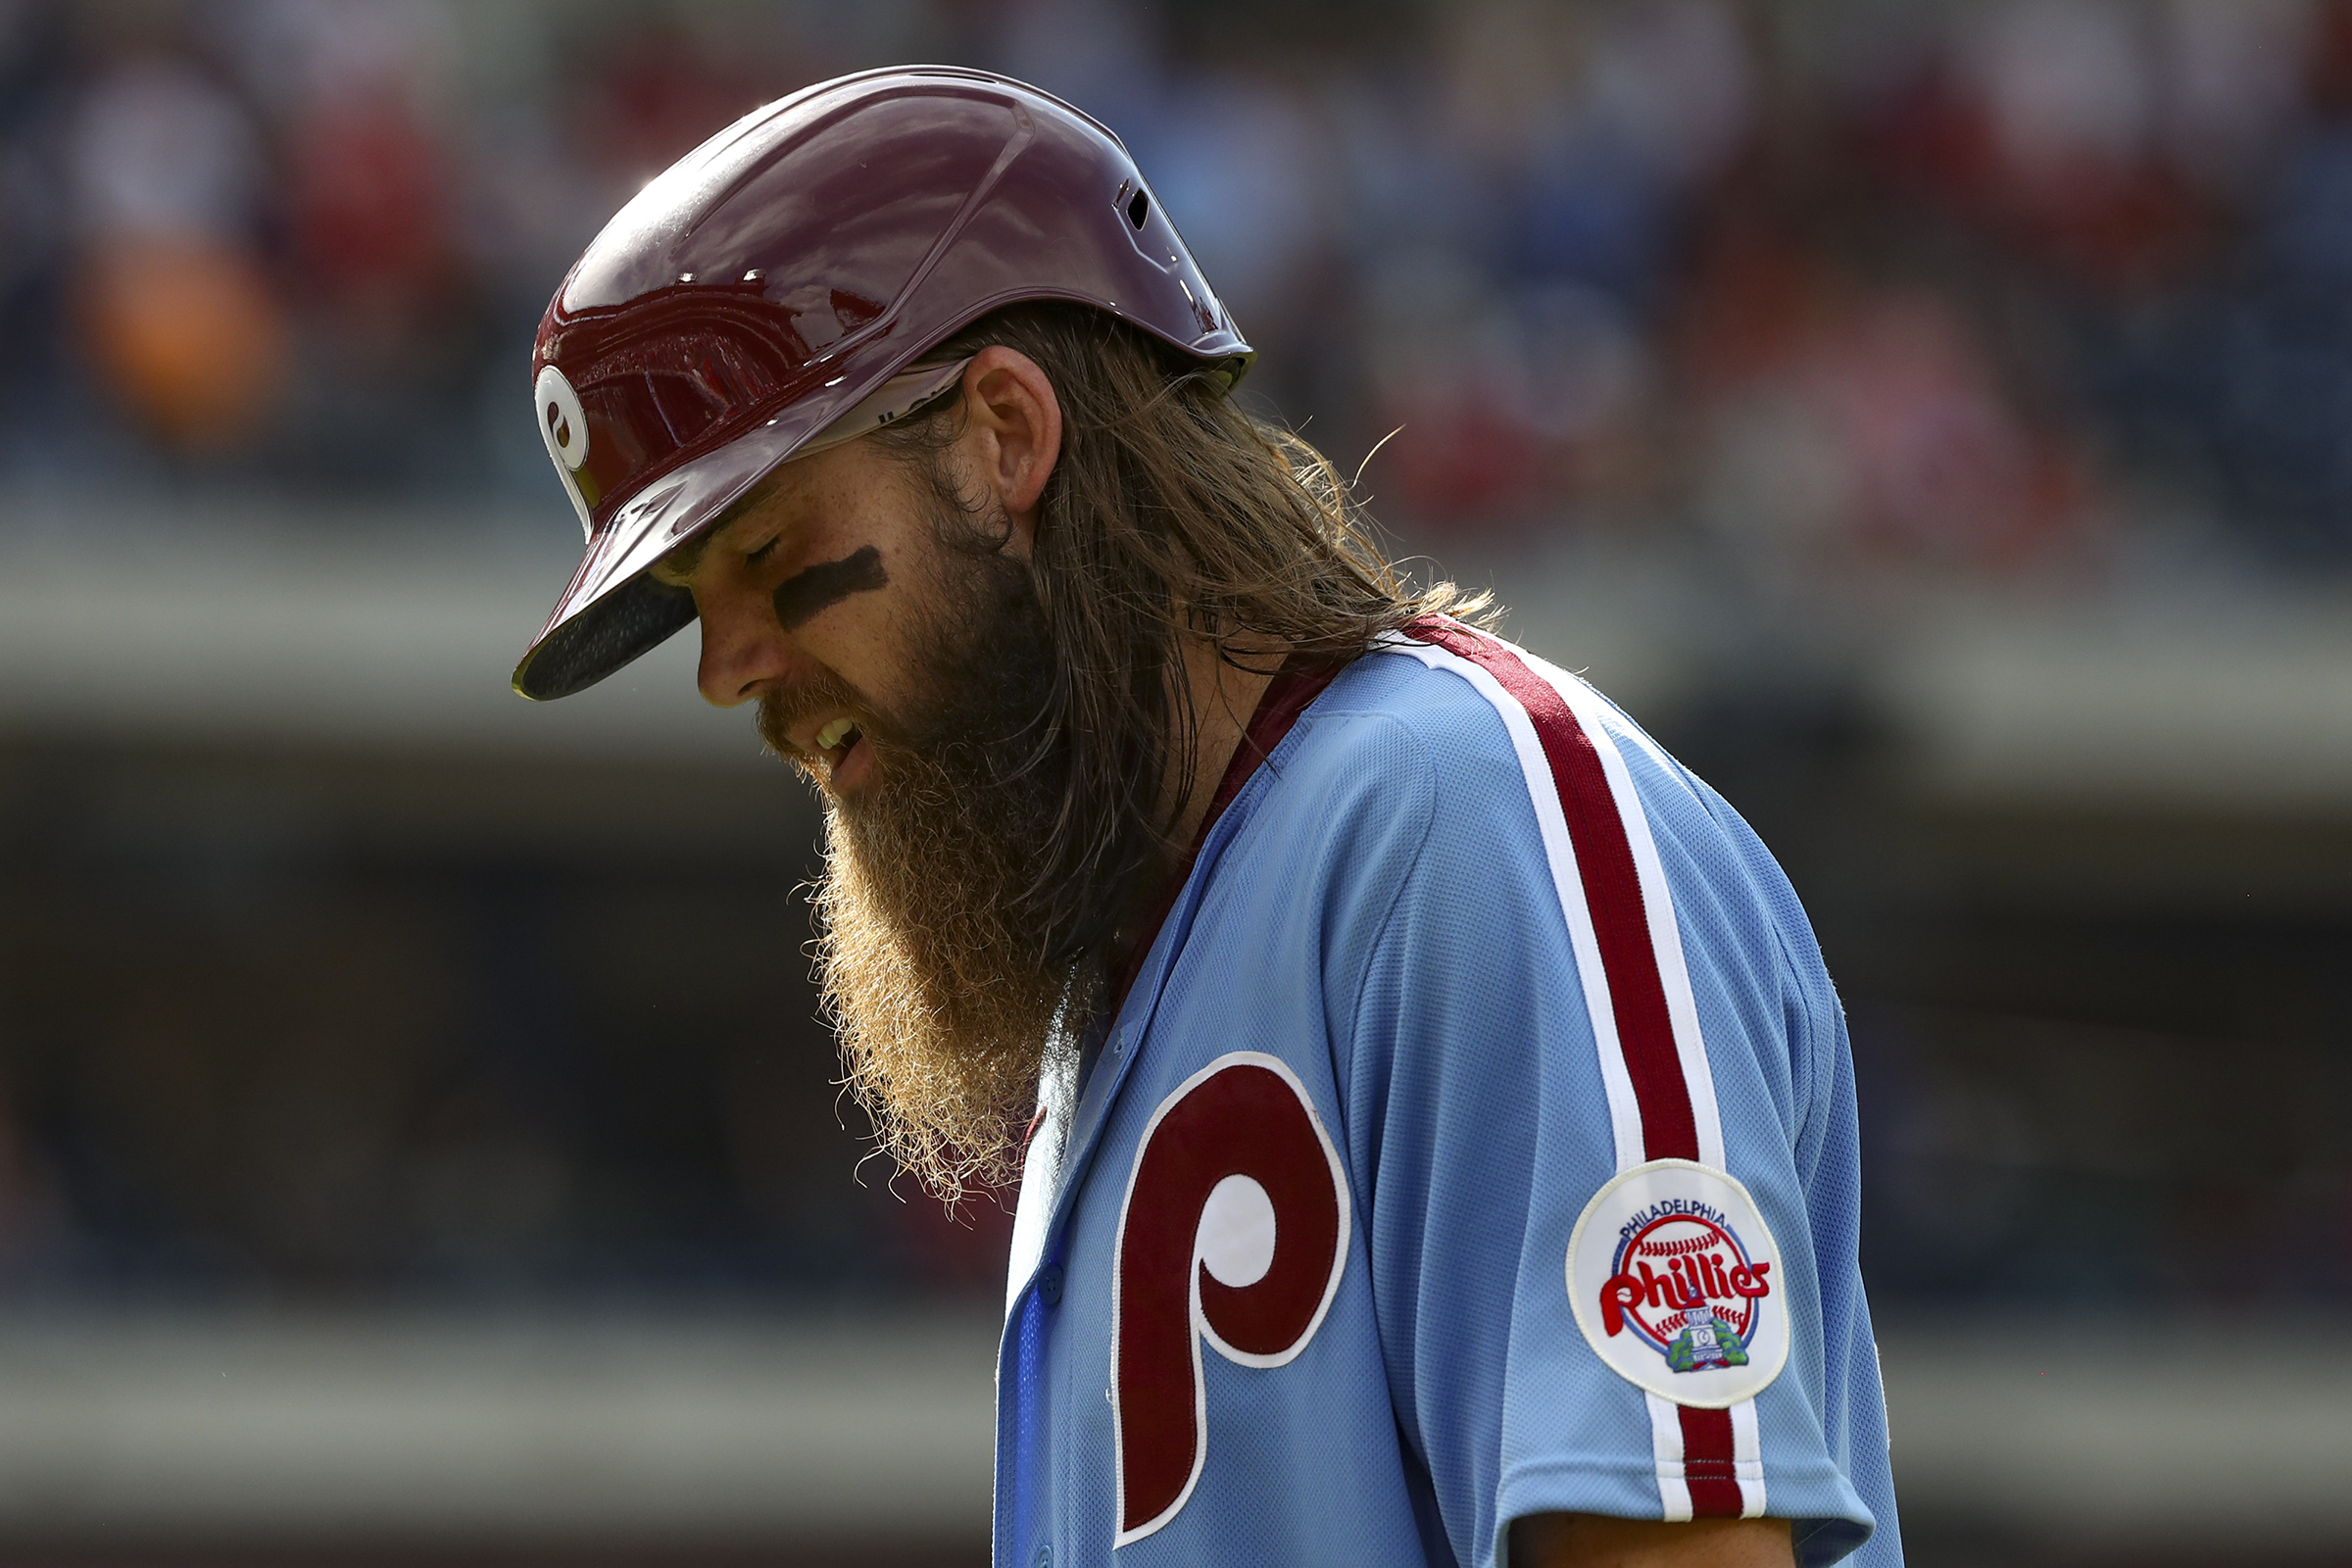 Why Brandon Marsh's wet hair makes him a perfect fit with the Phillies